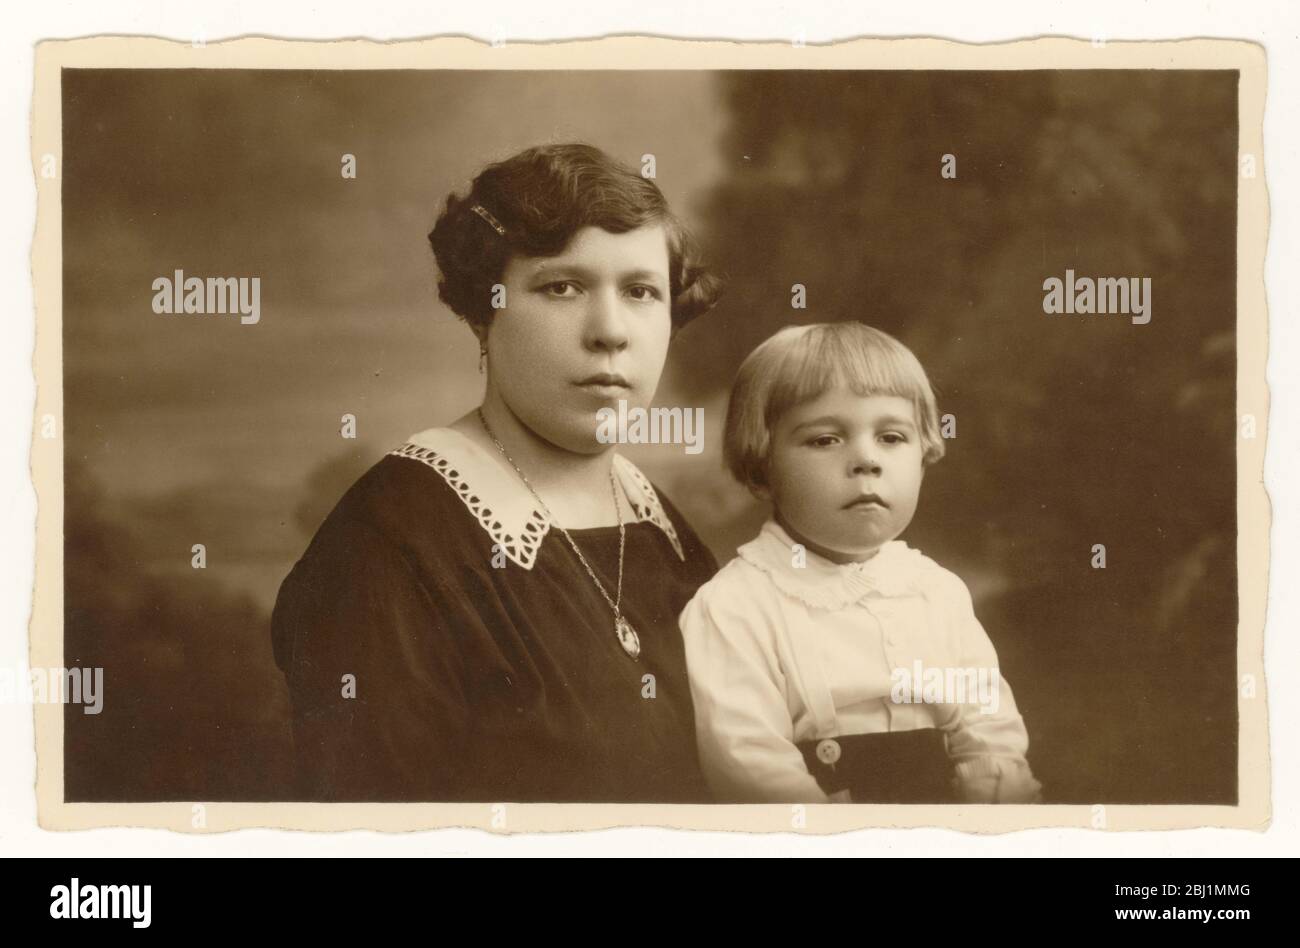 Early 1900's photo of boy aged about 3 years with bob hairstyle, sitting with his mother, both looking serious, U.K. circa 1925 Stock Photo